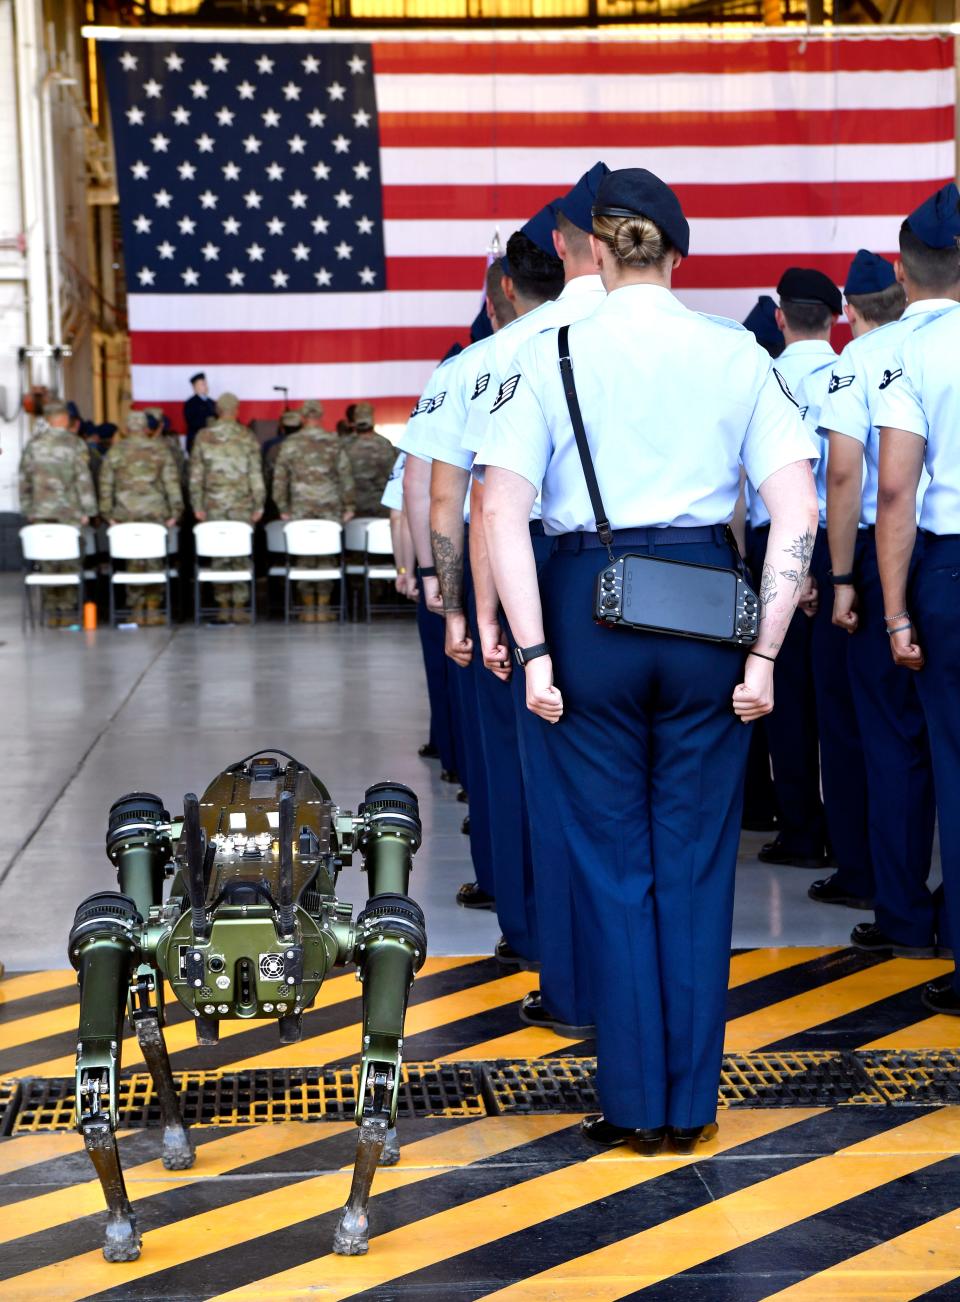 Cerberus, a QUGB or Quadruped Unattended Ground Vehicle, stands in formation beside Sg. Rachel Corke during Monday’s change of command ceremony.